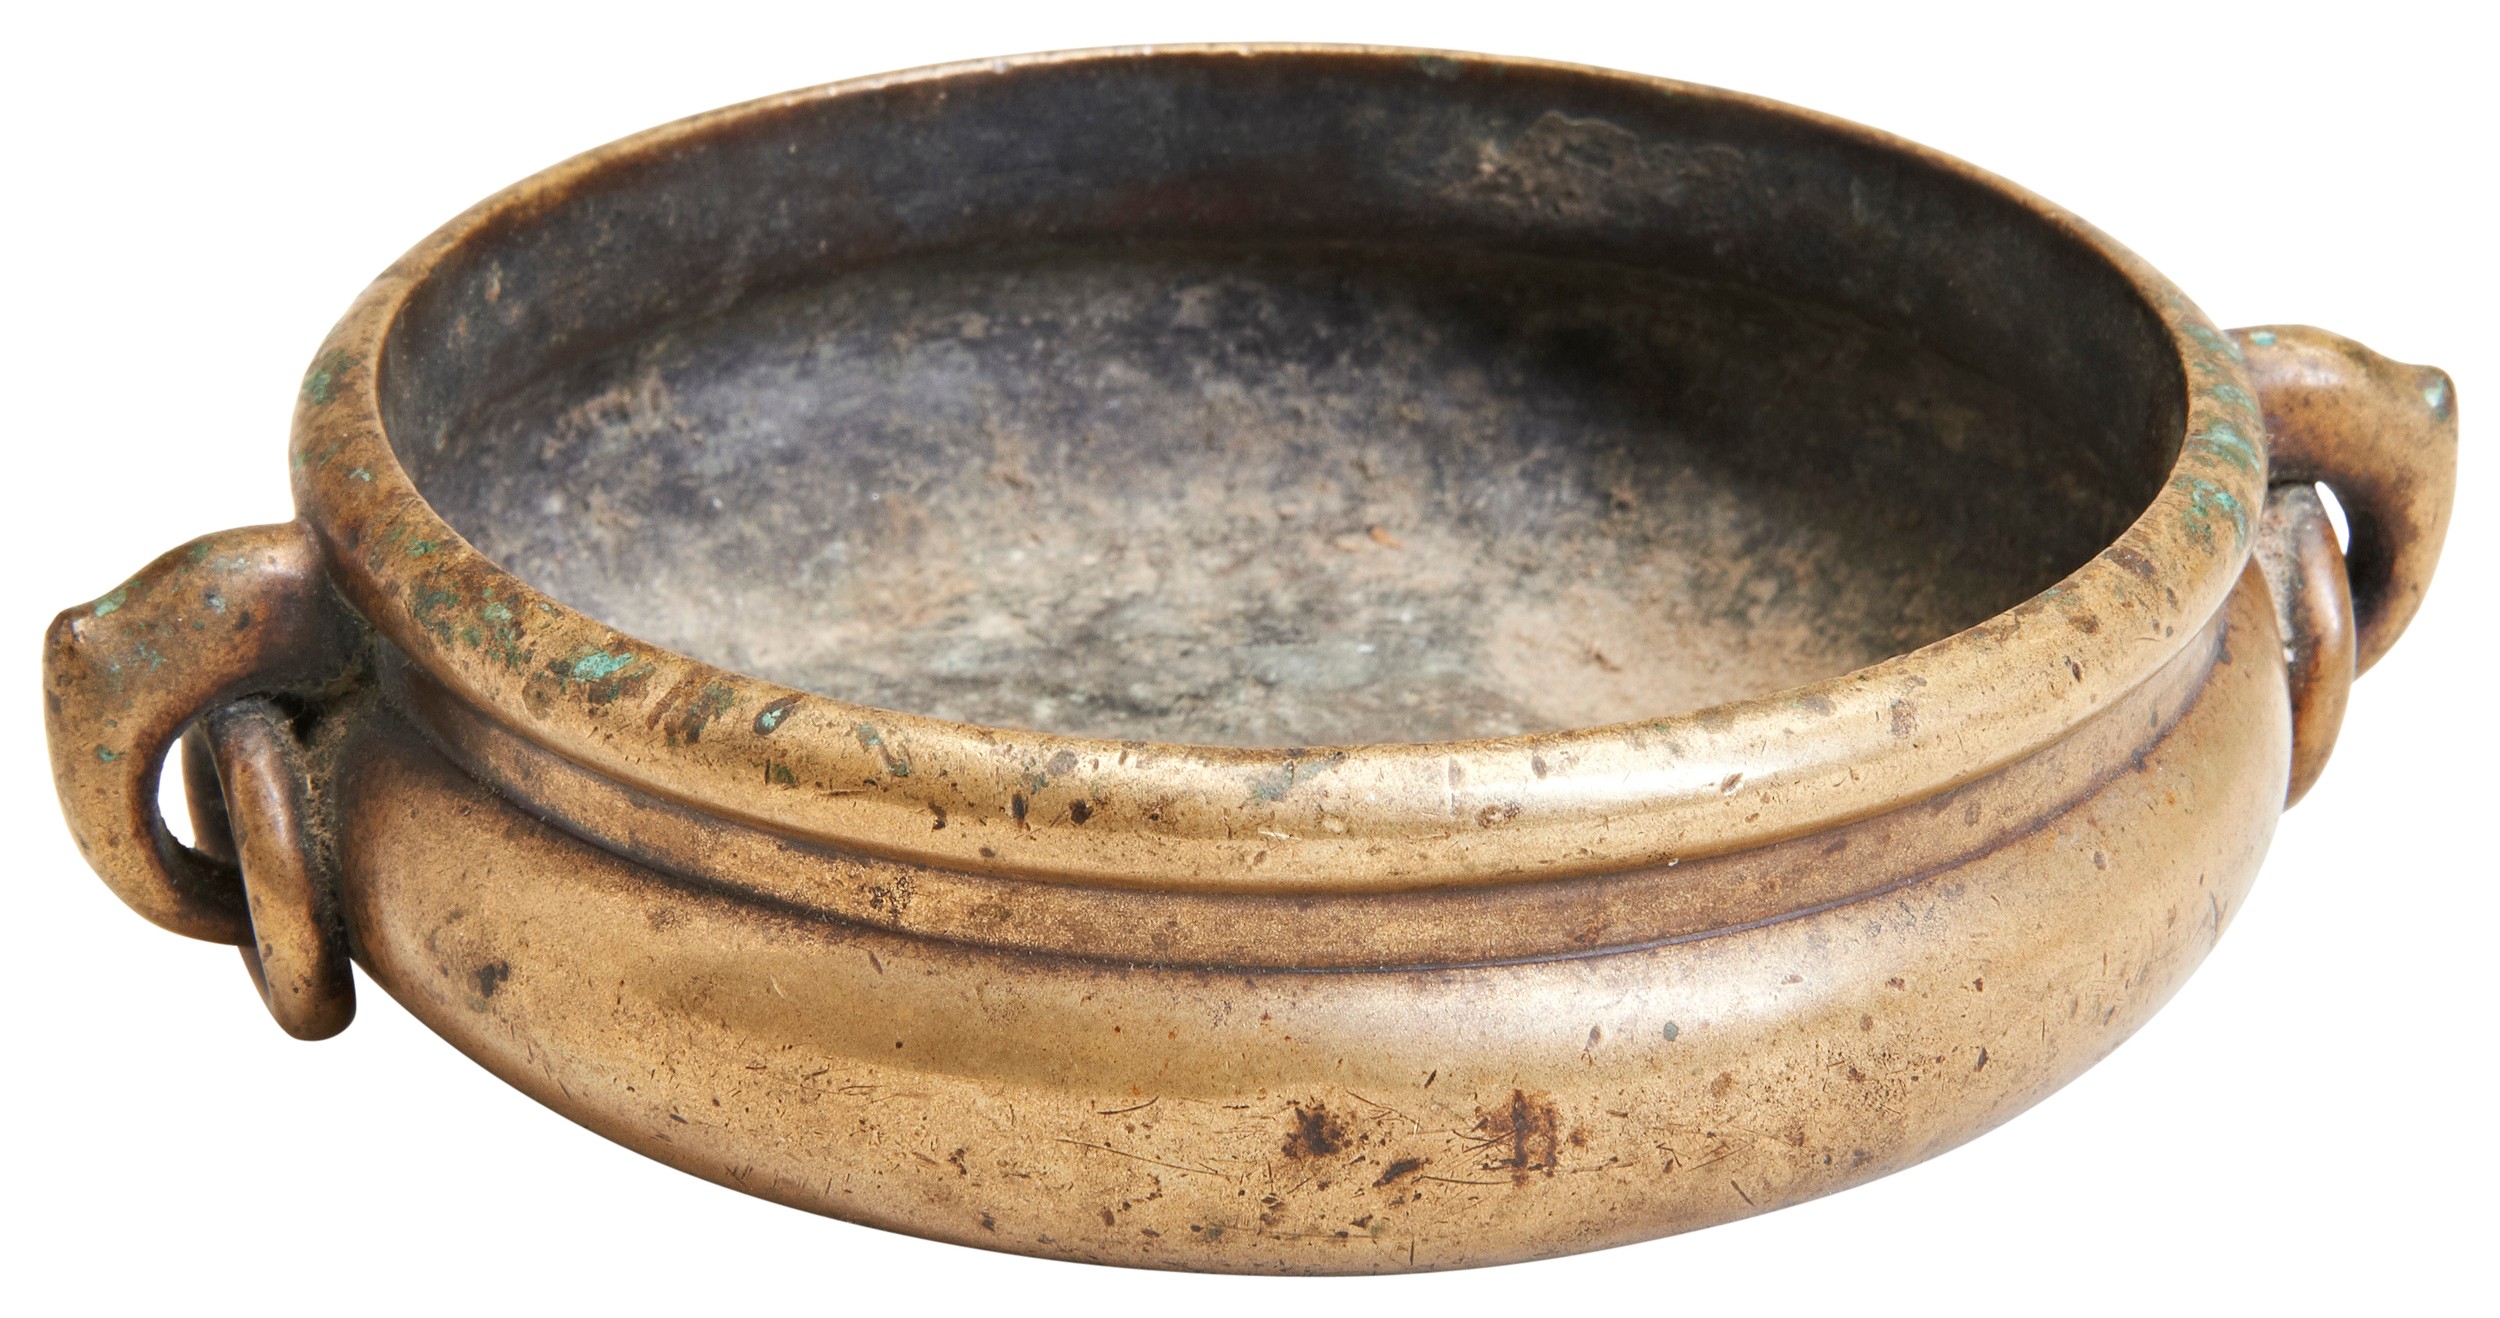 A RARE BRONZE TRIPOD CENSER 17TH CENTURY of compressed globular form with two scroll and loop